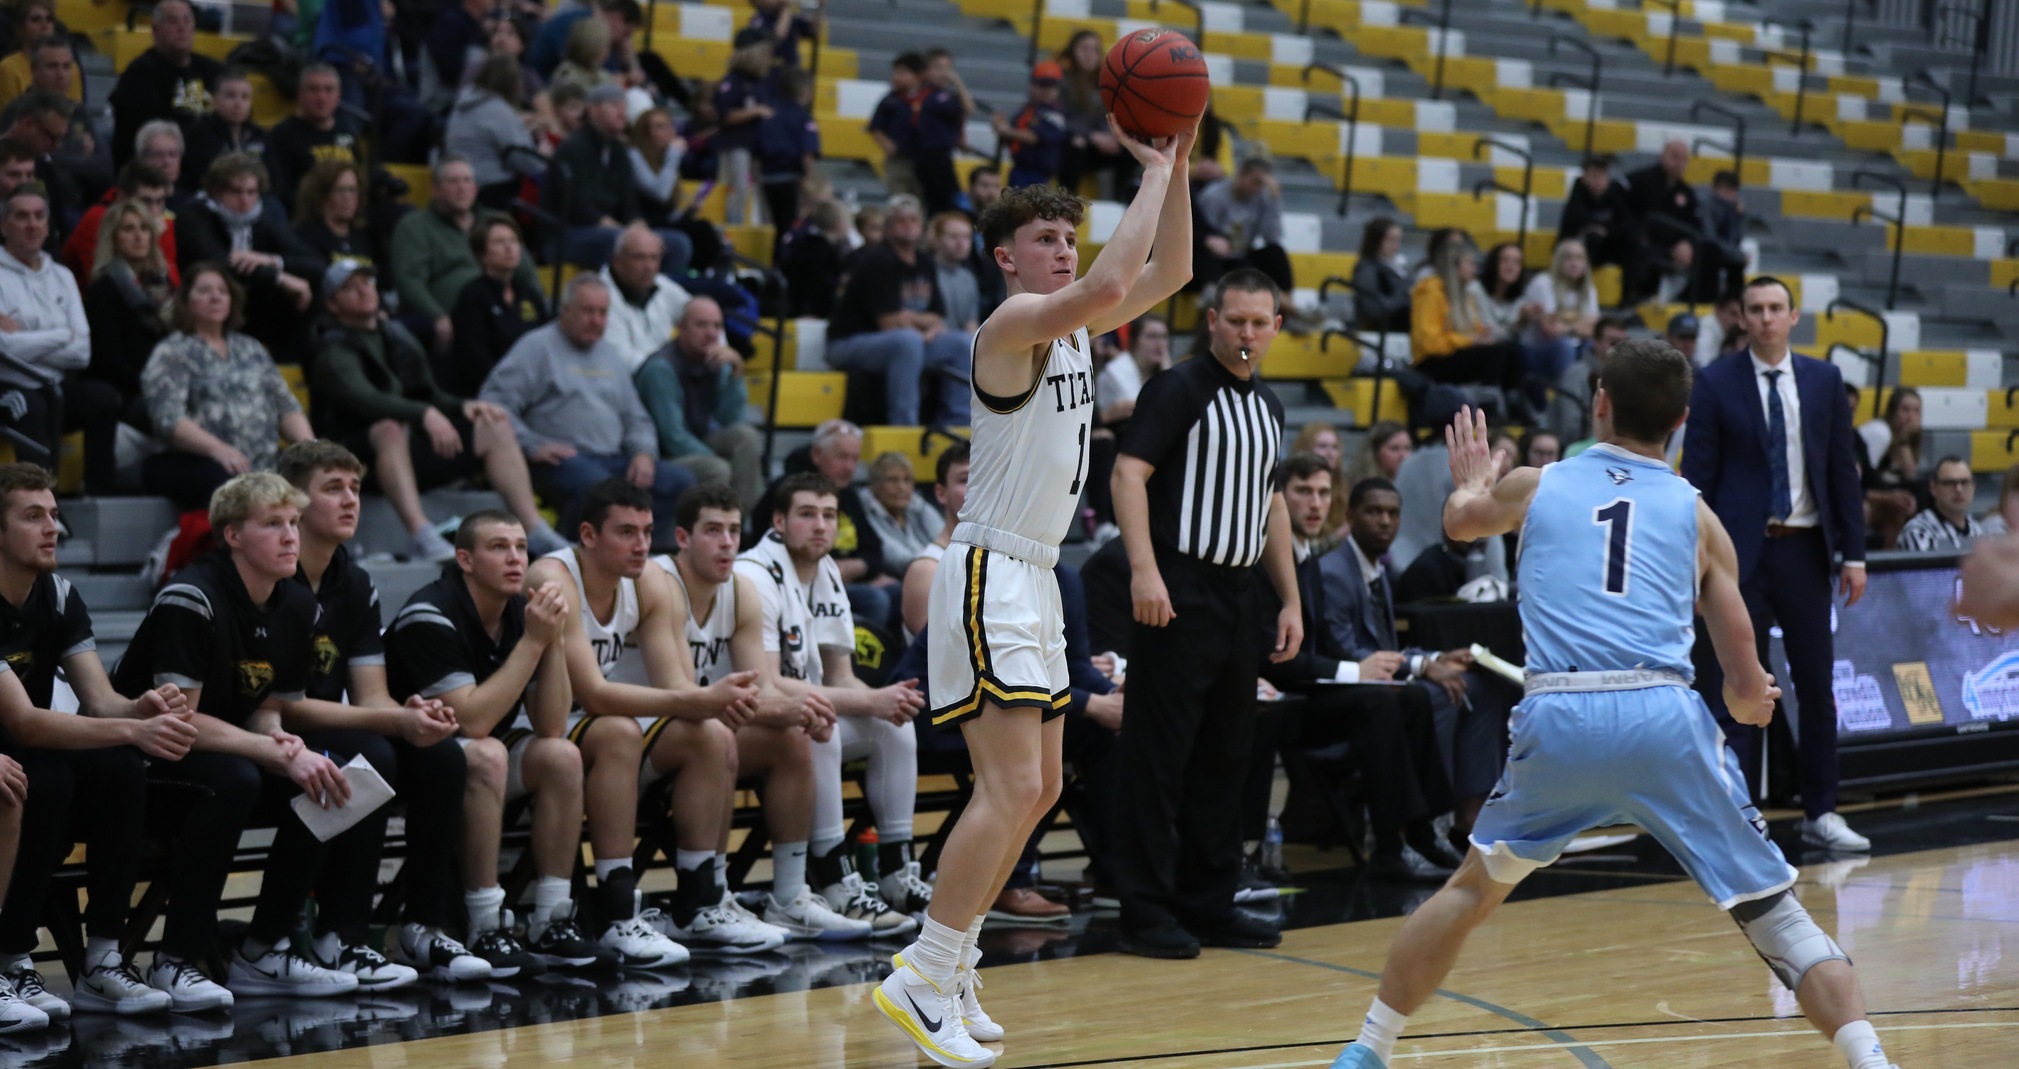 Will Mahoney scored a career-high 25 points, including five 3-point baskets, against the Bluejays.